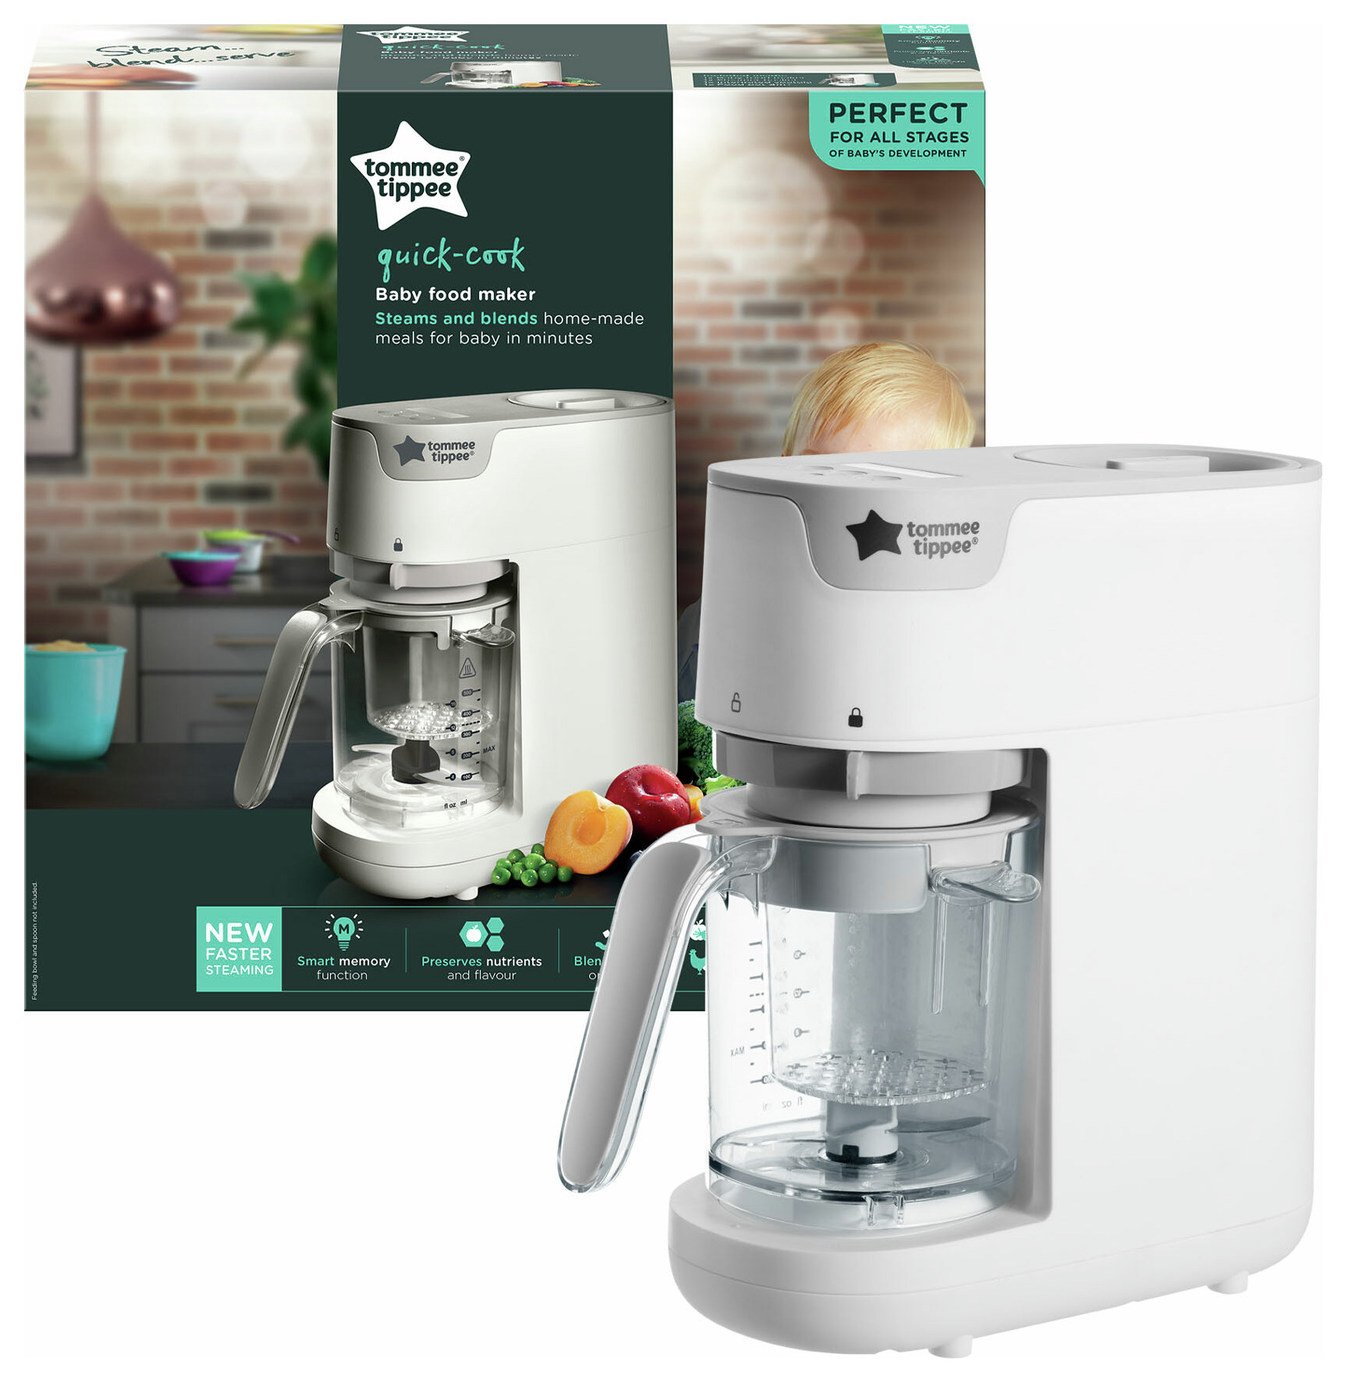 Tommee Tippee Quick-Cook Baby Food Blender Review